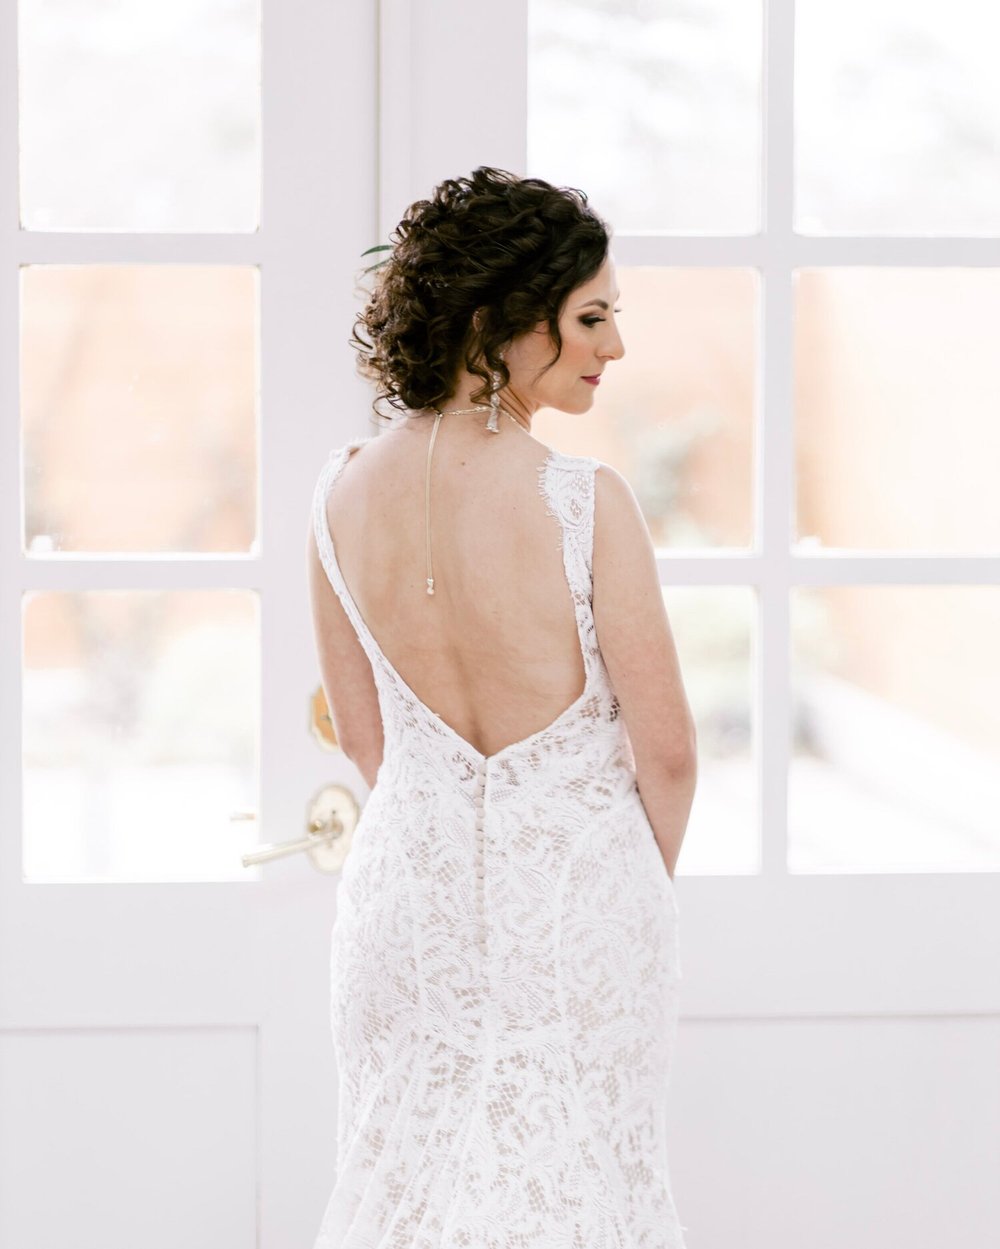  bride with open back wedding dress 